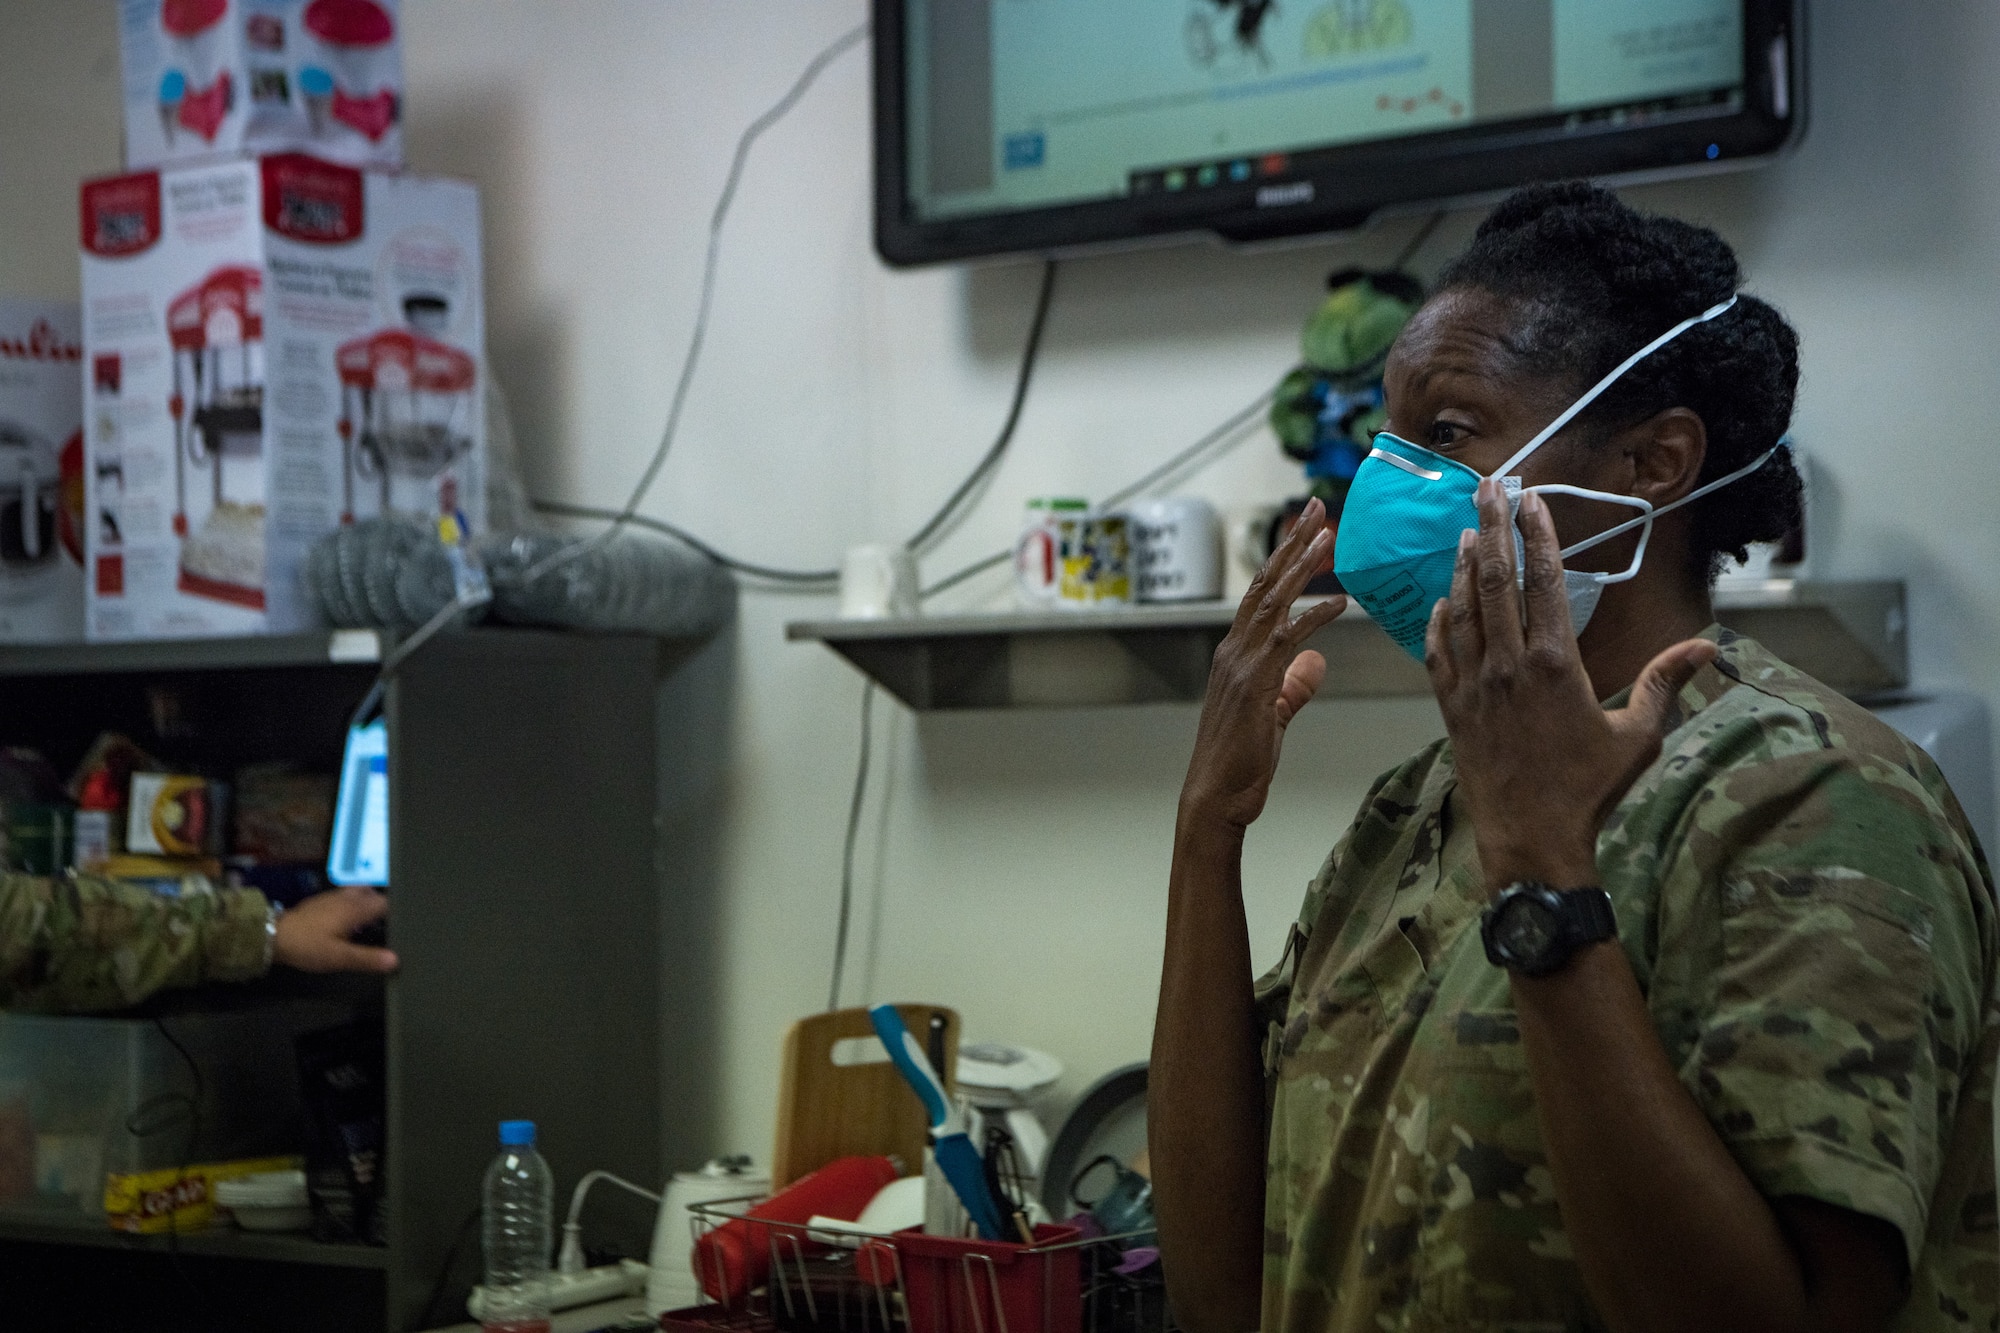 Airman demonstrates how to put on N95 mask properly